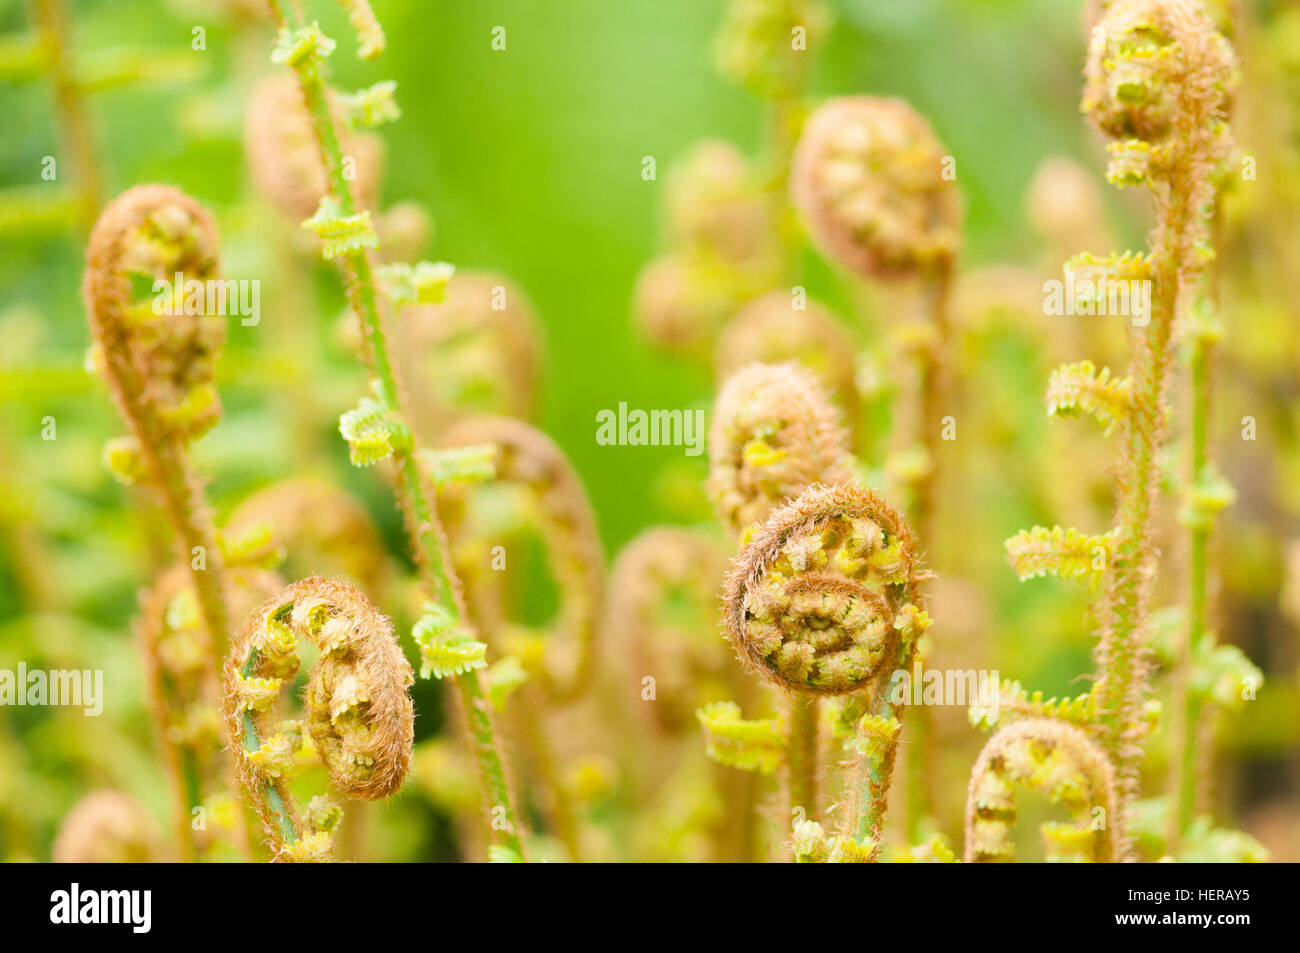 Rolled up fern leaf Stock Photo